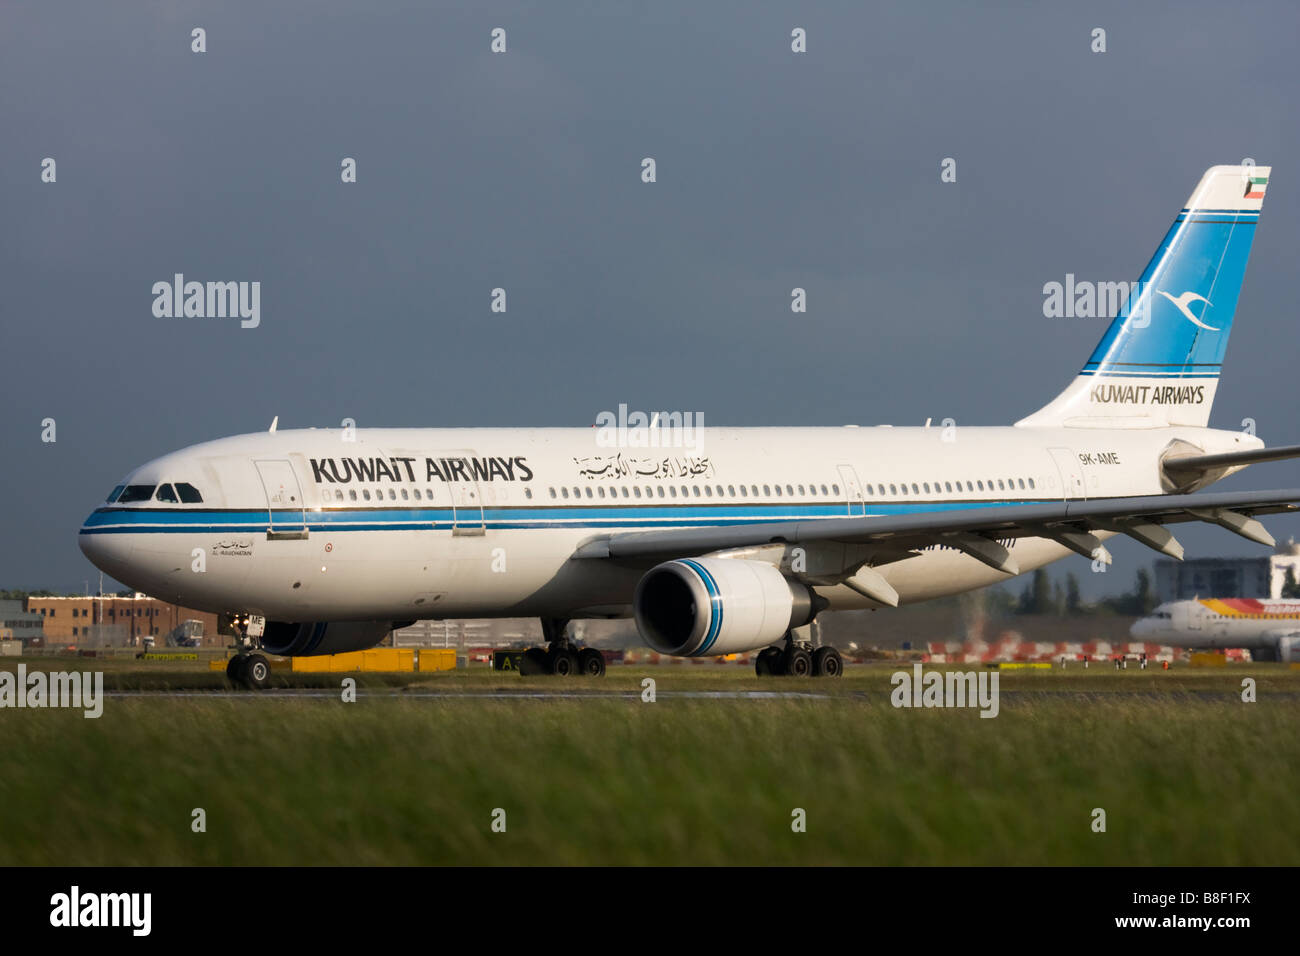 Kuwait Airways Airbus A300B4-605R taxiing for departure at London Heathrow airport. Stock Photo